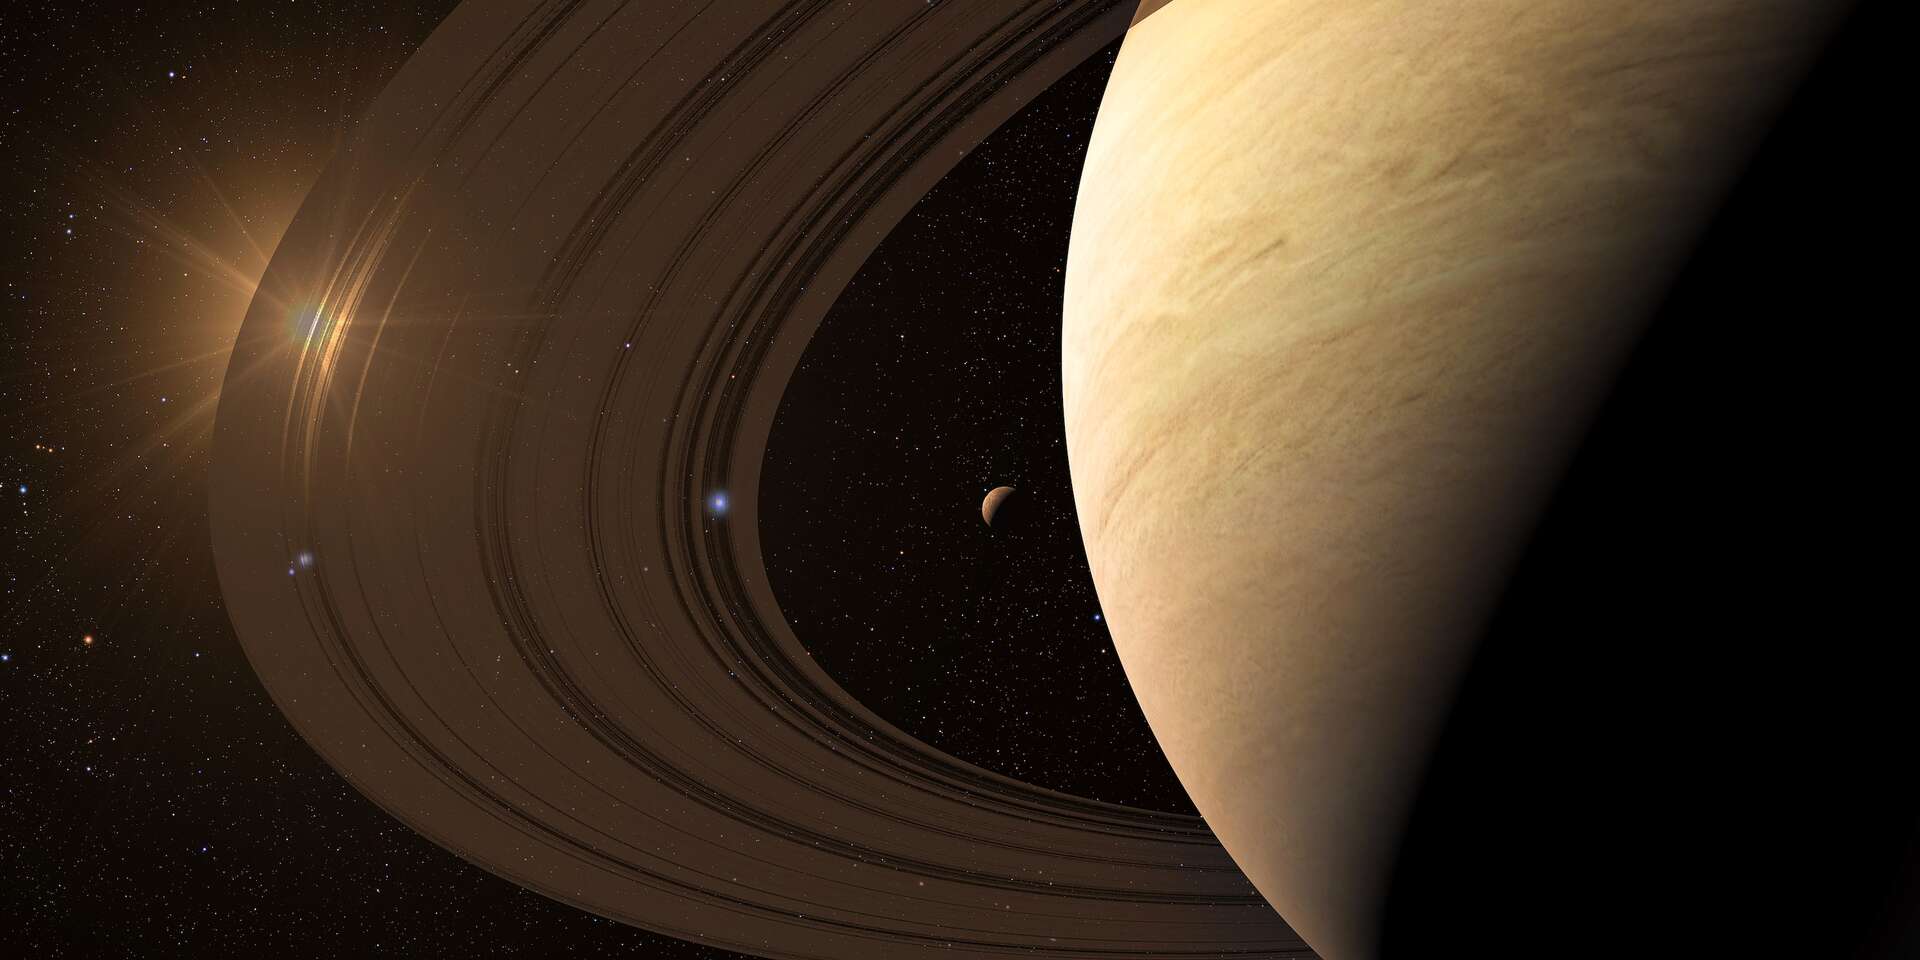 Saturn’s superstorms last for centuries